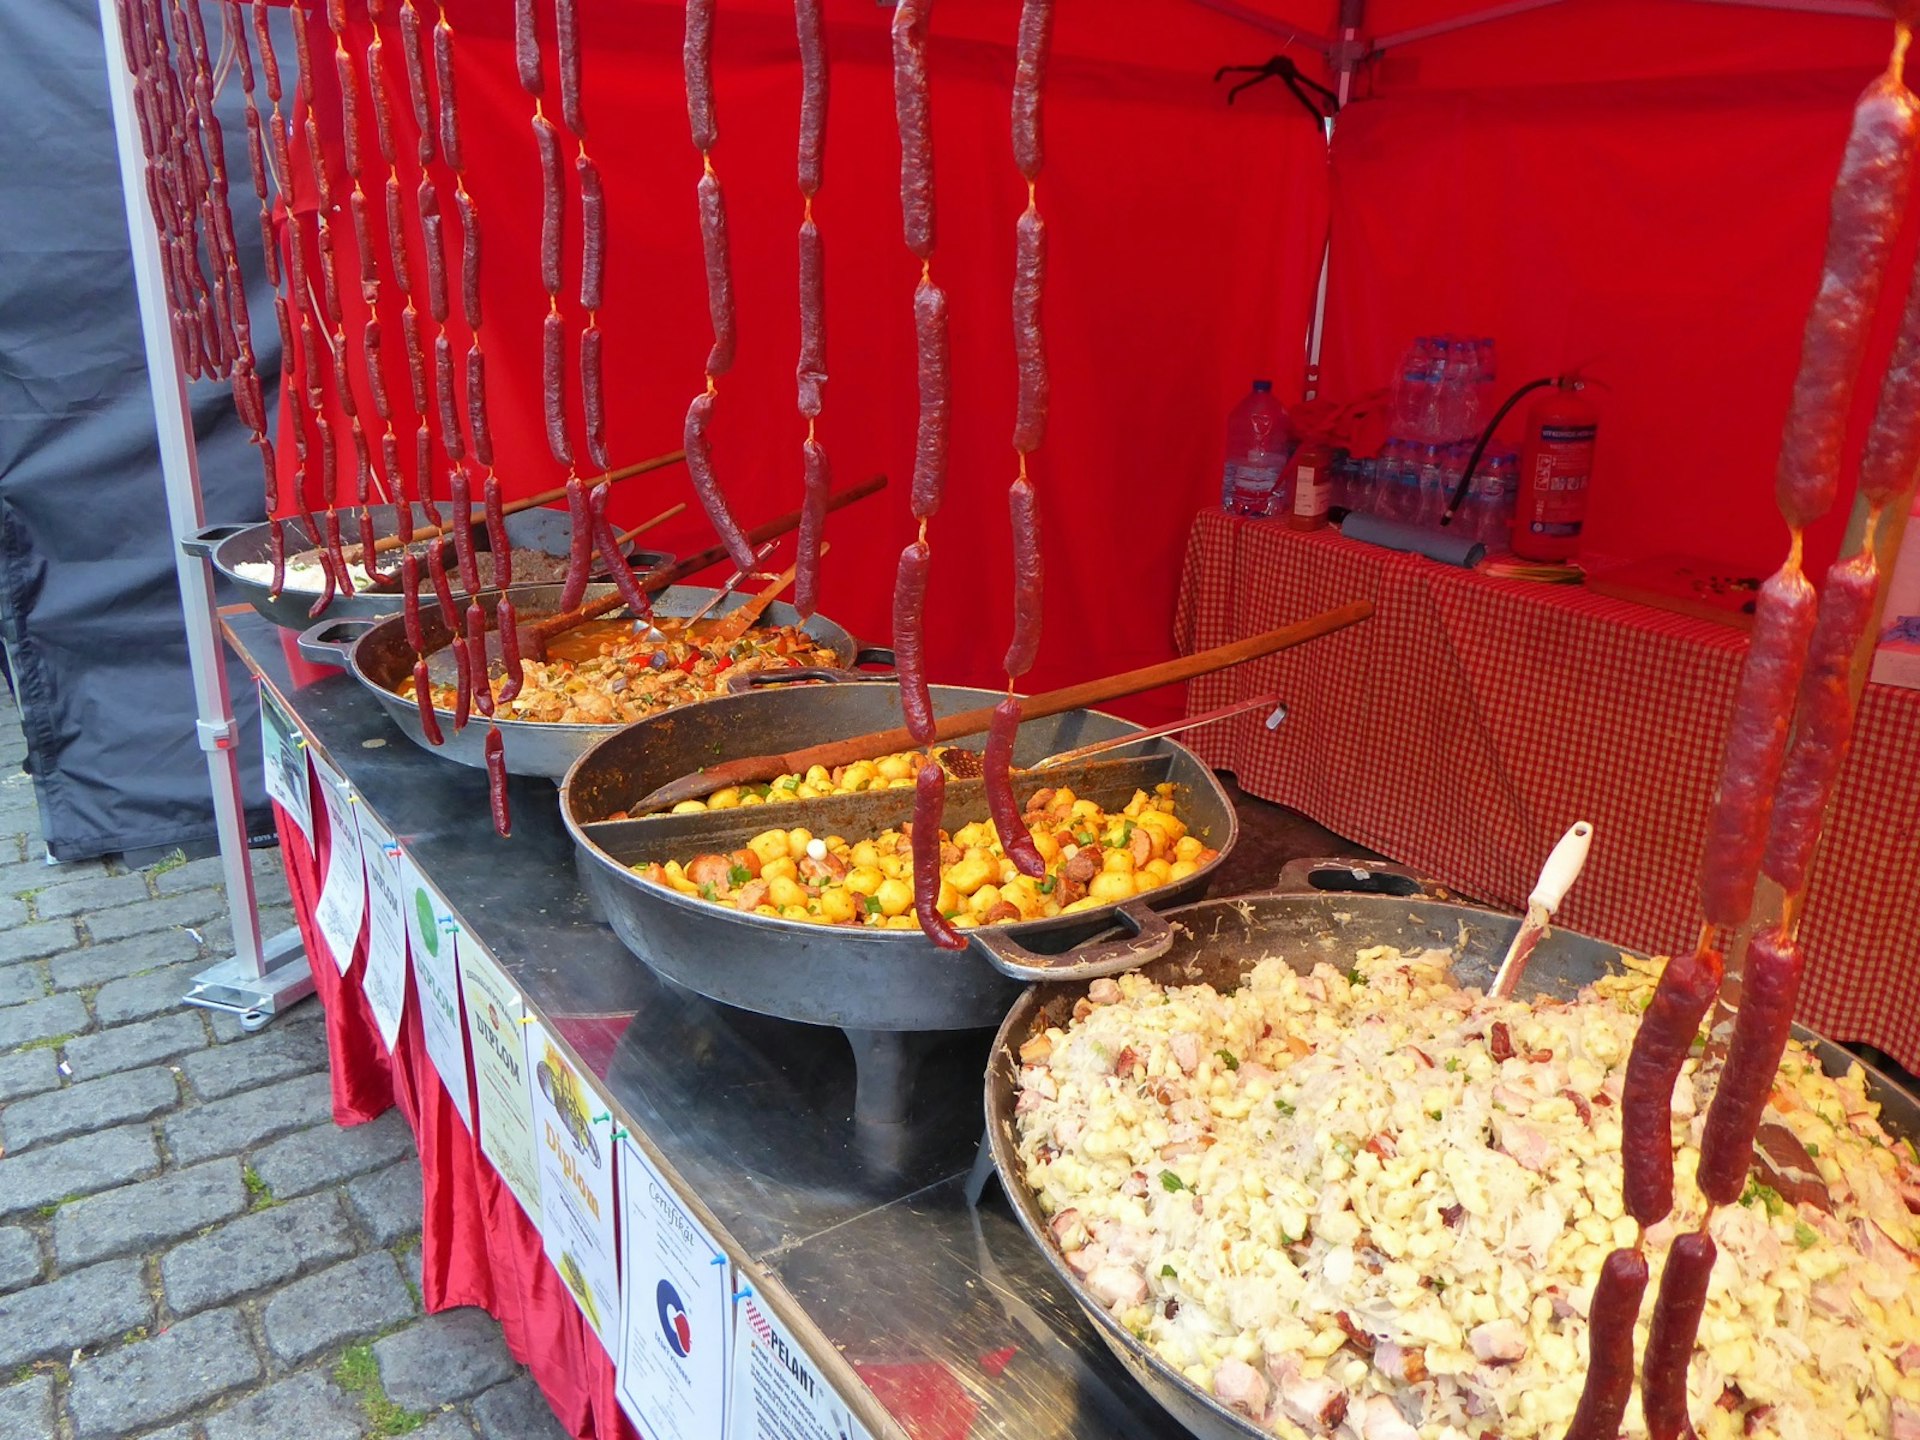 A market stall features four huge pans of food, with long-handled wooden spoons to stir them, and long strings of sausages hung vertically in the front